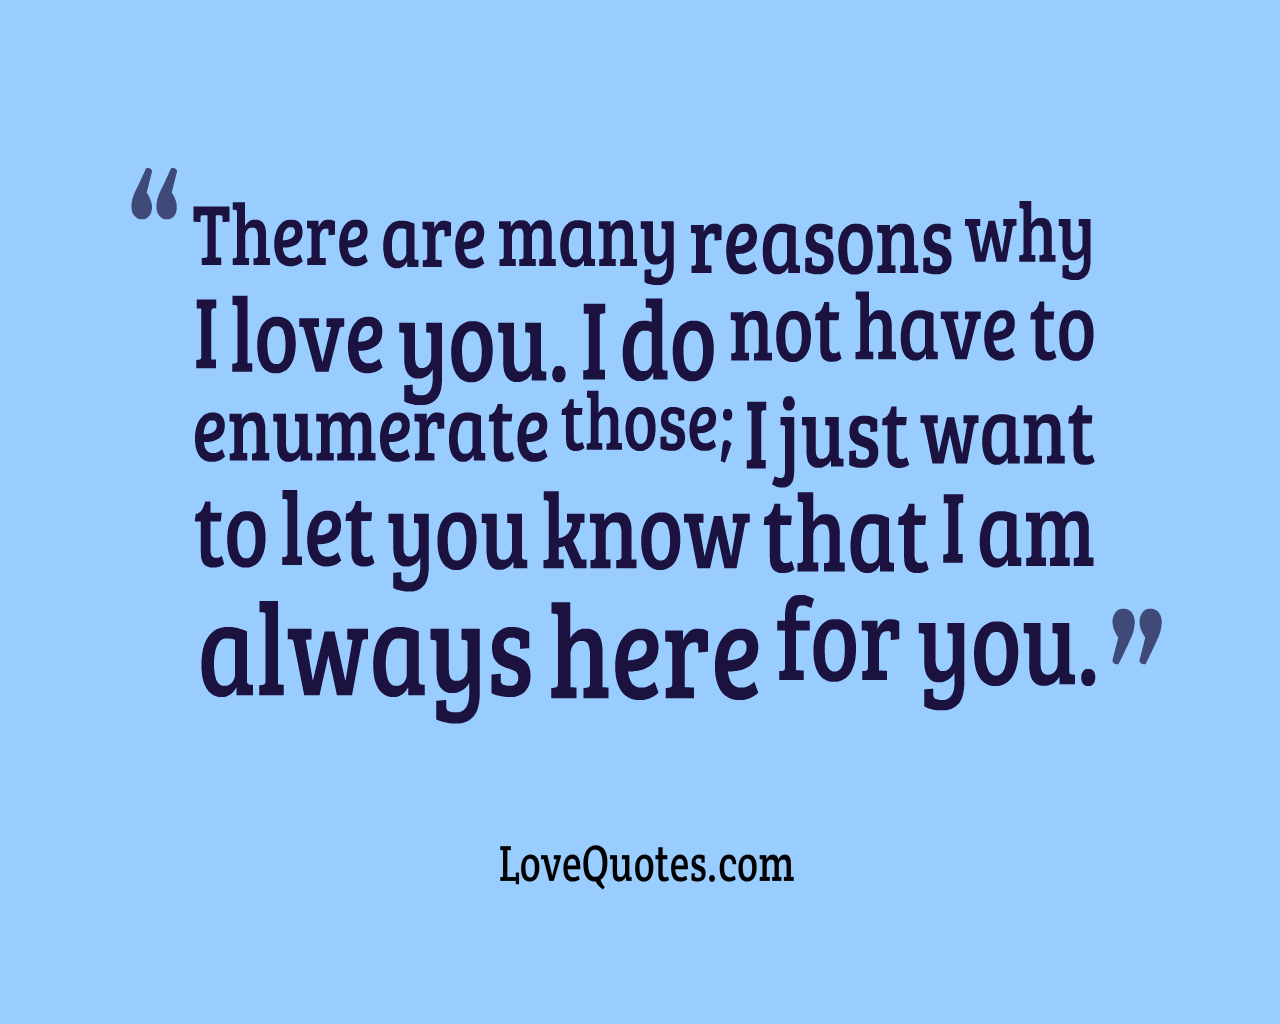 Reasons Why I Love You - Love Quotes